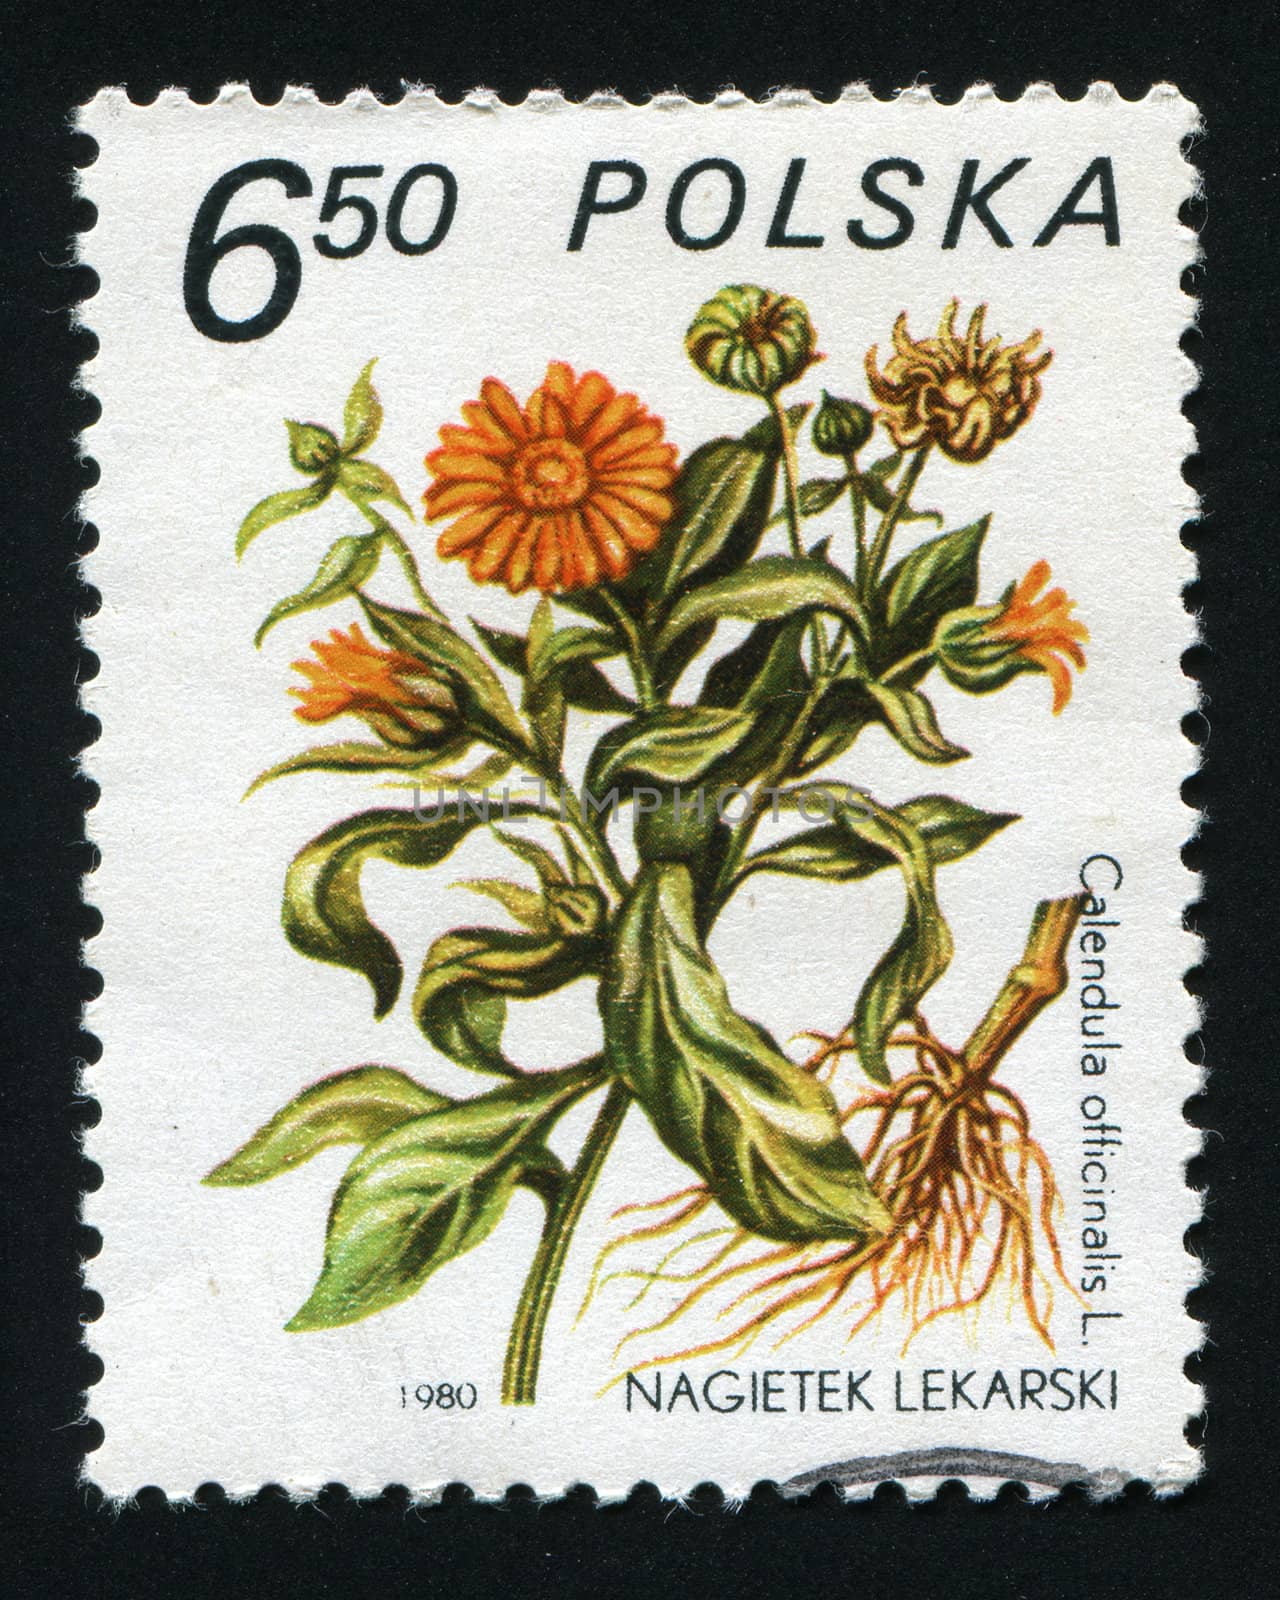 POLAND -CIRCA 1980: Calendula pot marigold, is a genus of about 12-20 species of annual or perennial herbaceous plants in the daisy family Asteraceae, circa 1980.